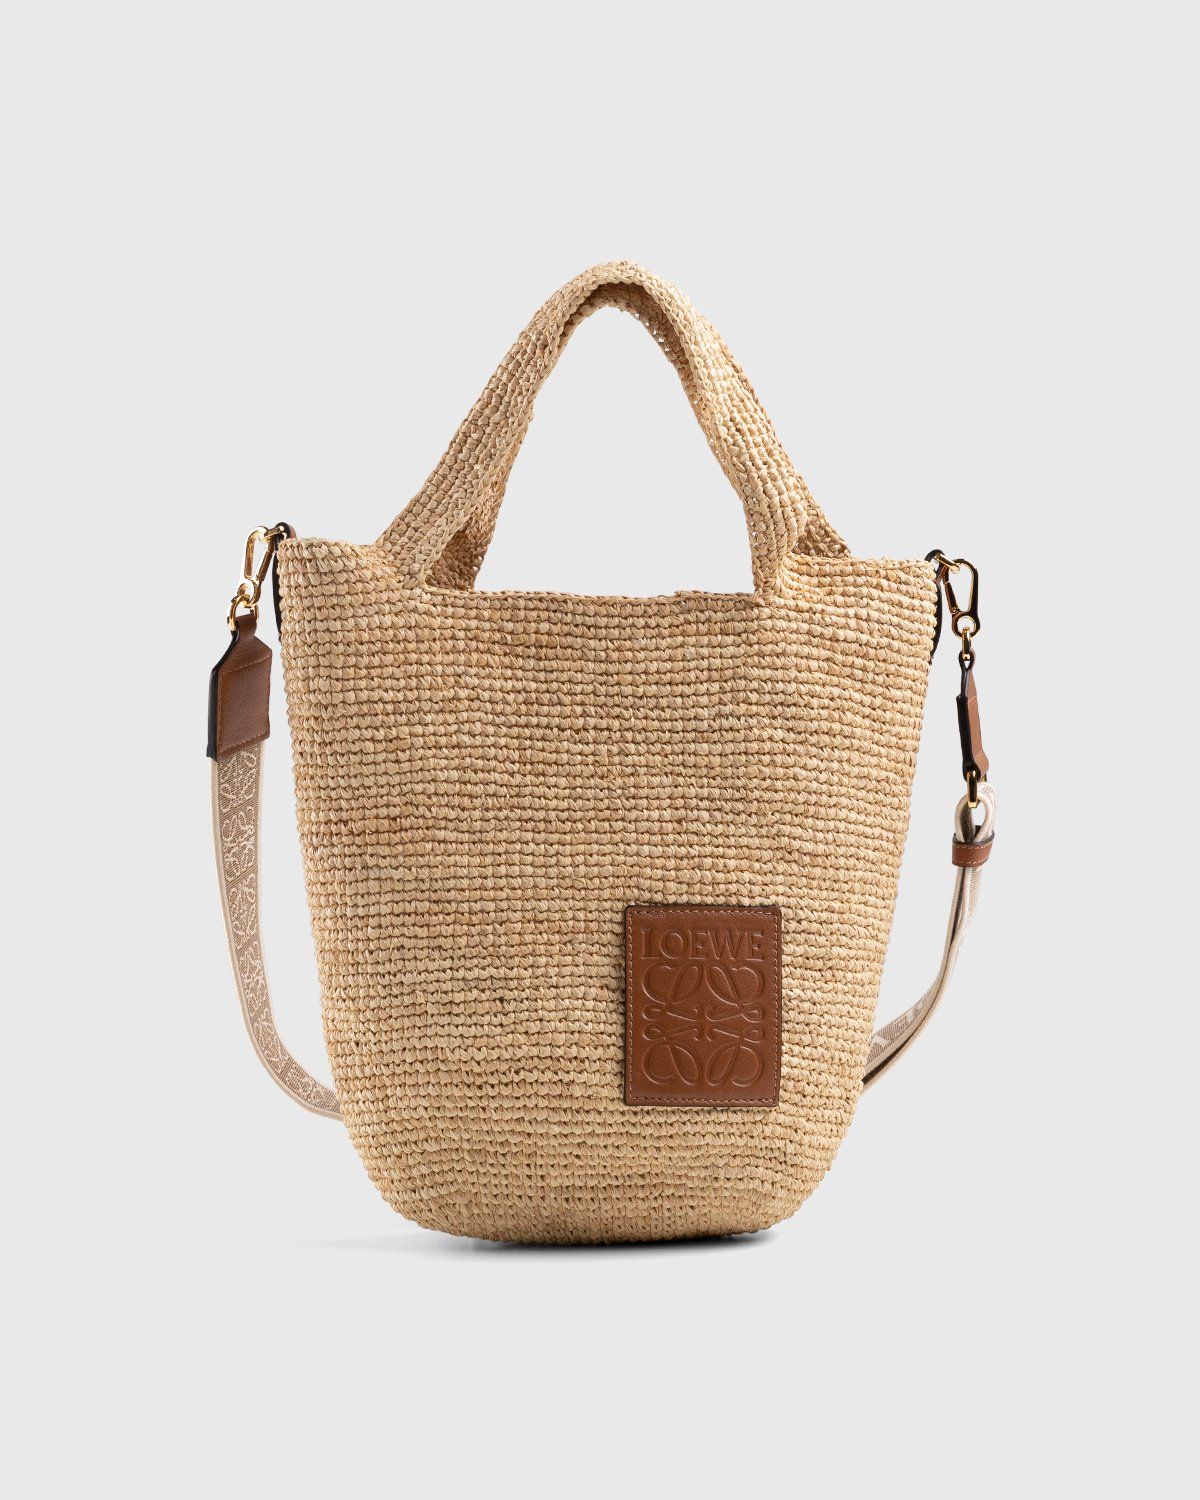 Loewe Basket Bag in Palm Leaf and Calfskin Small Natural/White